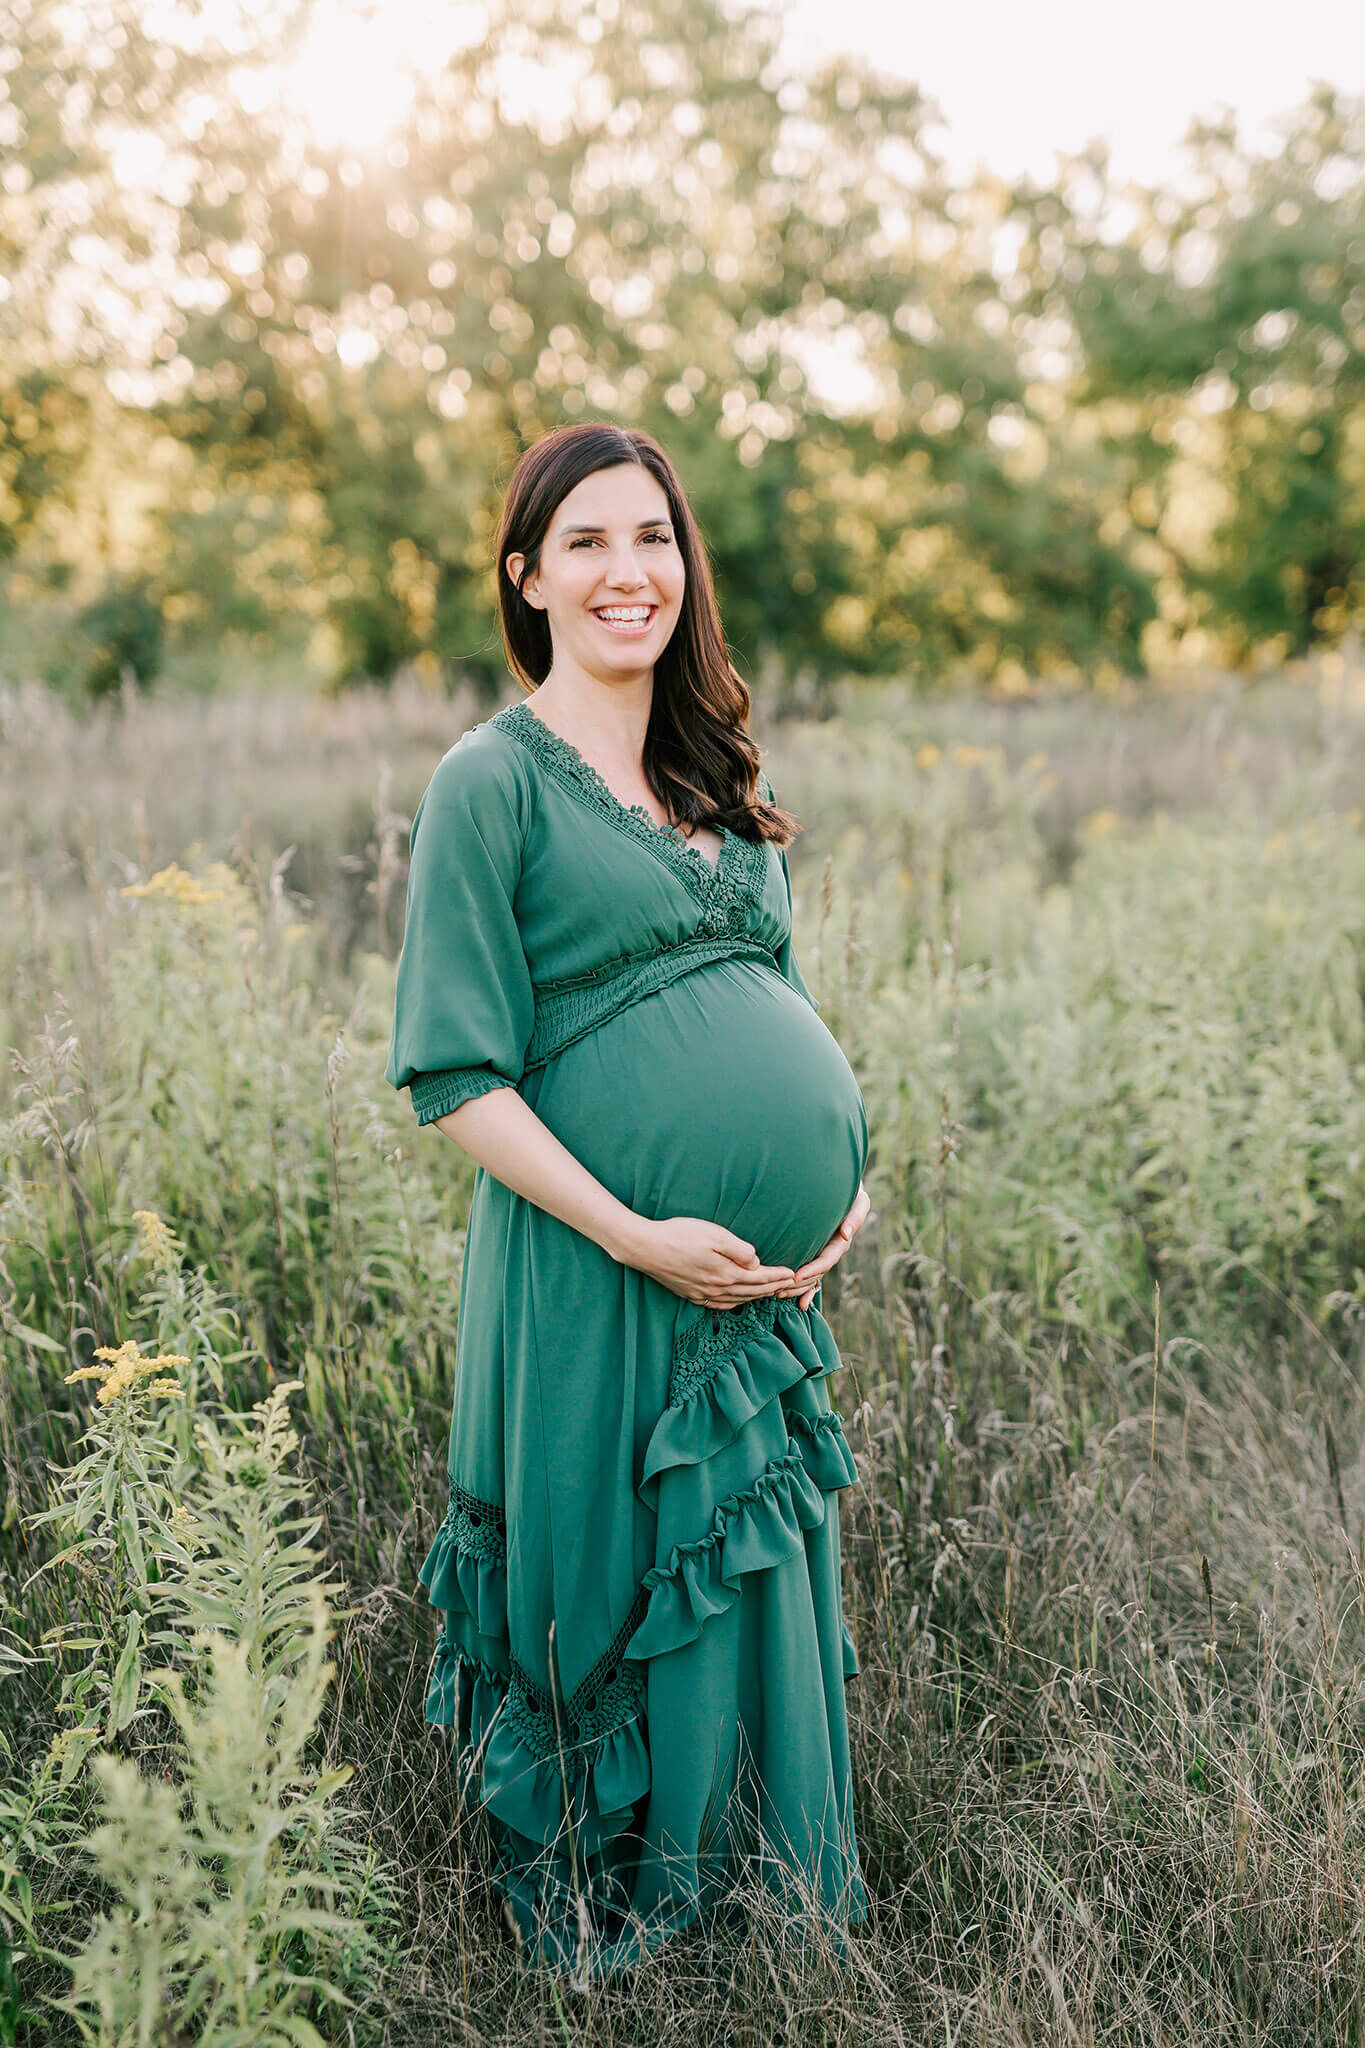 Expectant mother in a green dress stands in a field and smiles excitedly at the camera